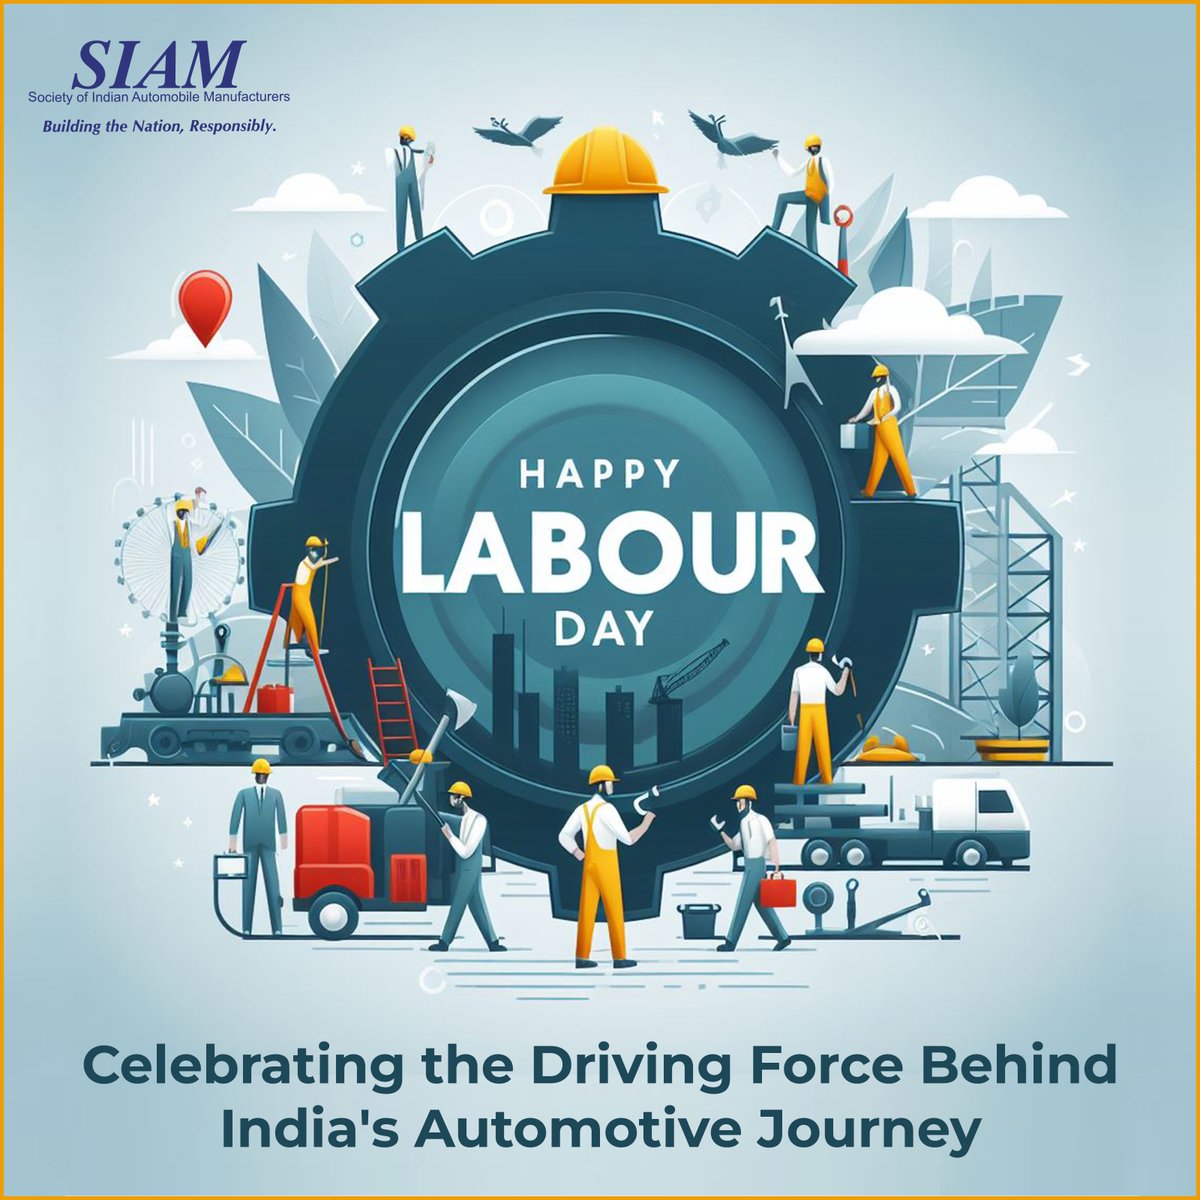 The success of the Indian Automotive sector is built on the foundation of our hardworking workforce. We acknowledge and appreciate your dedication and effort that has driven the Indian Mobility Industry forward. #SIAM #BTNR #LetsCelebrateLabourDay